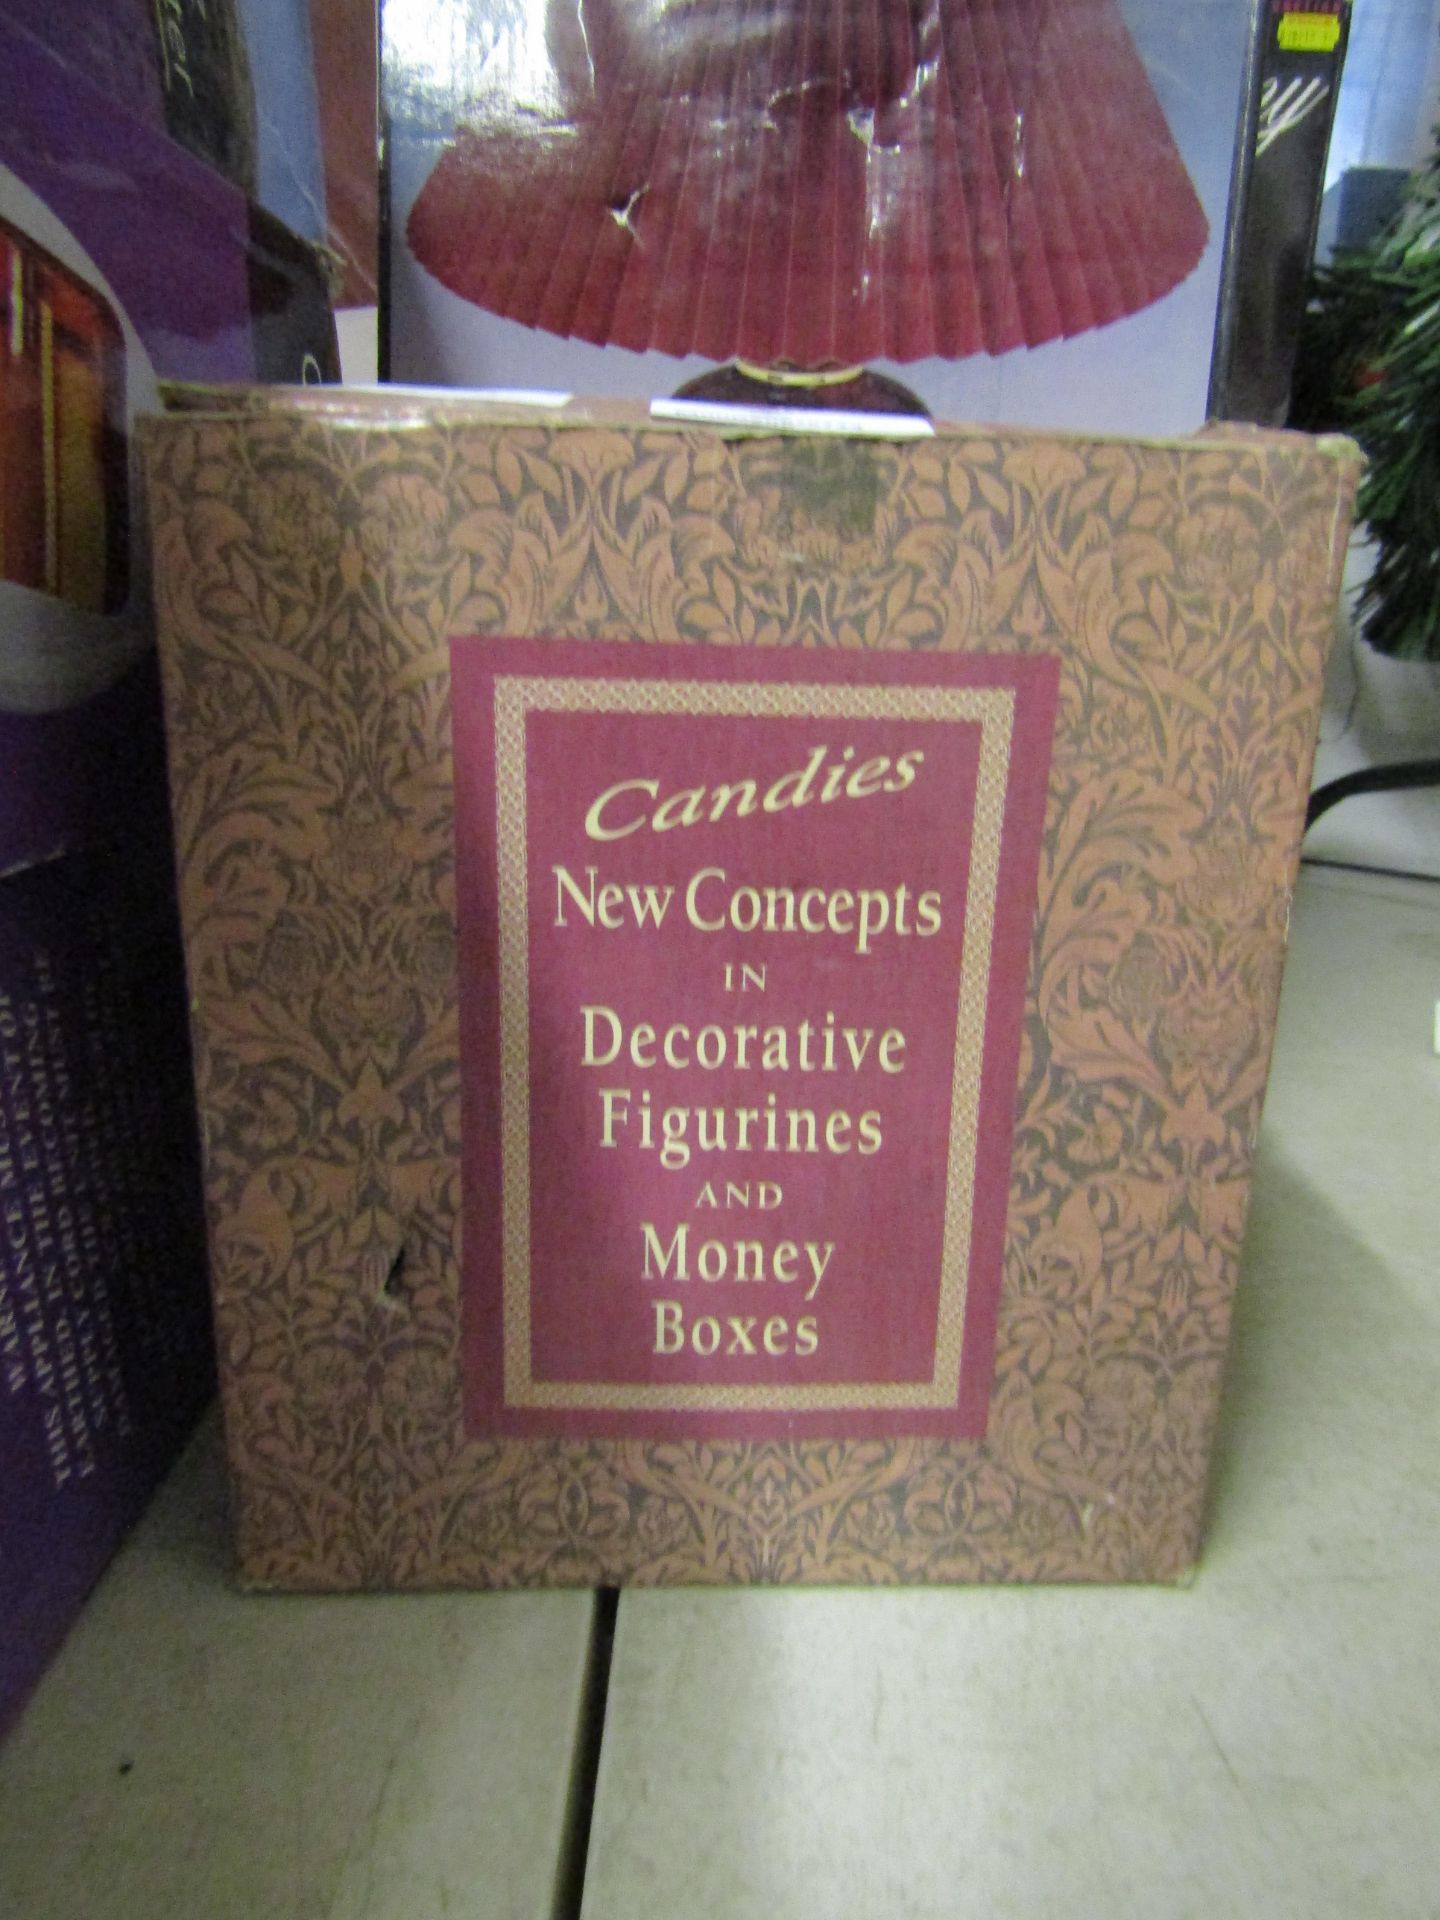 Candies New Concepts In Decorative Figurines And Money Boxes, Unchecked & Boxed.